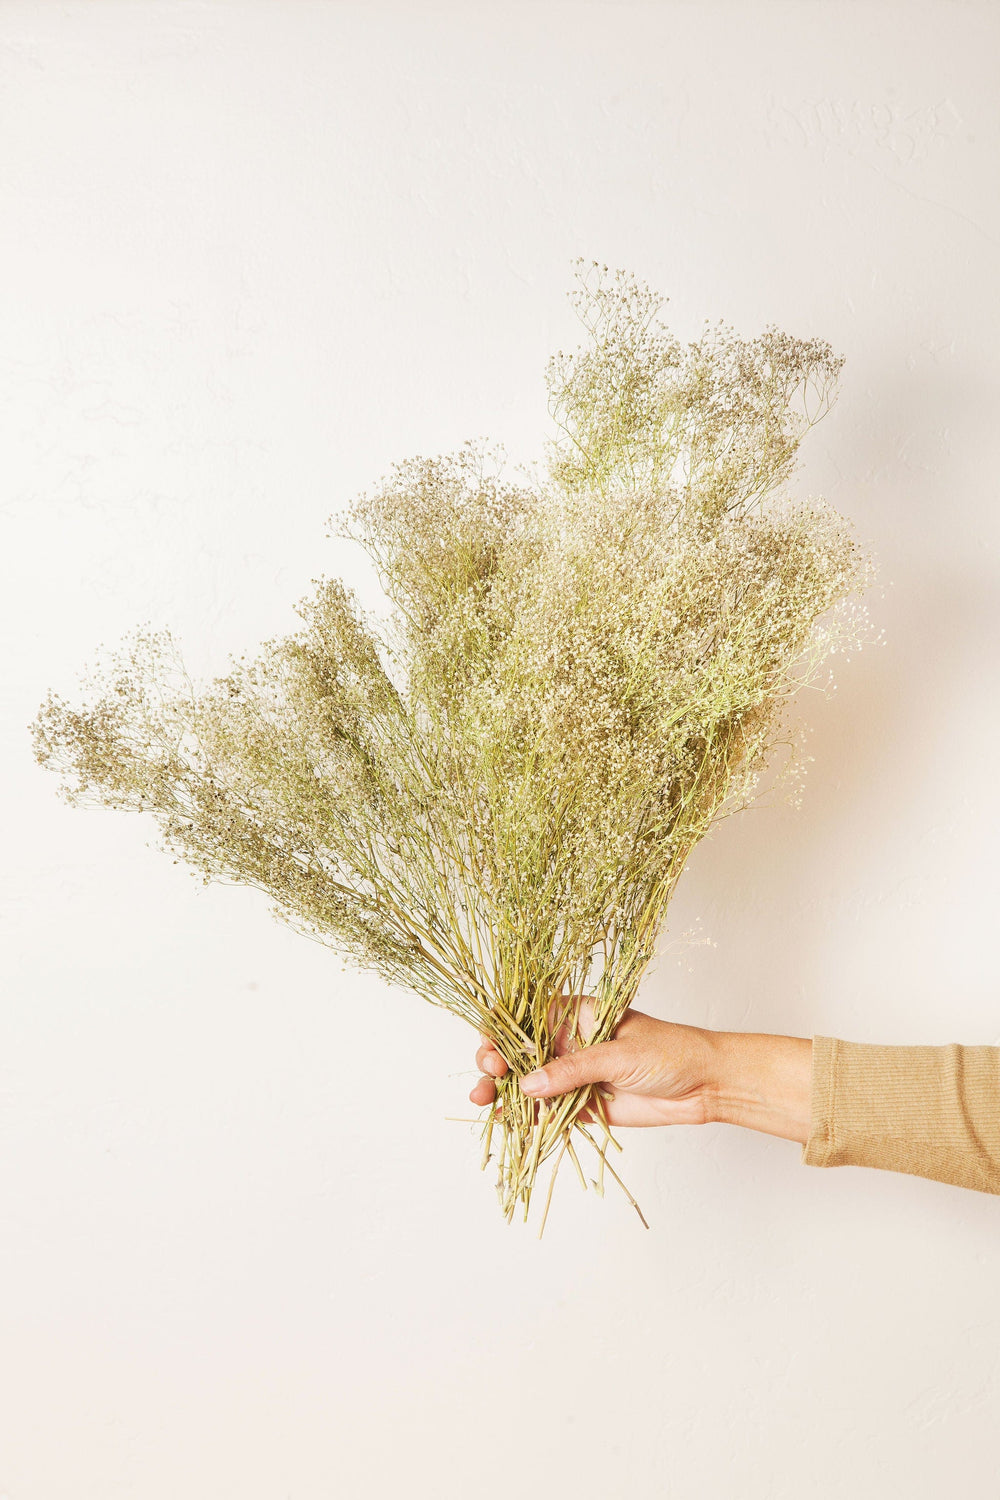 Idlewild Floral Co. Green Baby's Breath